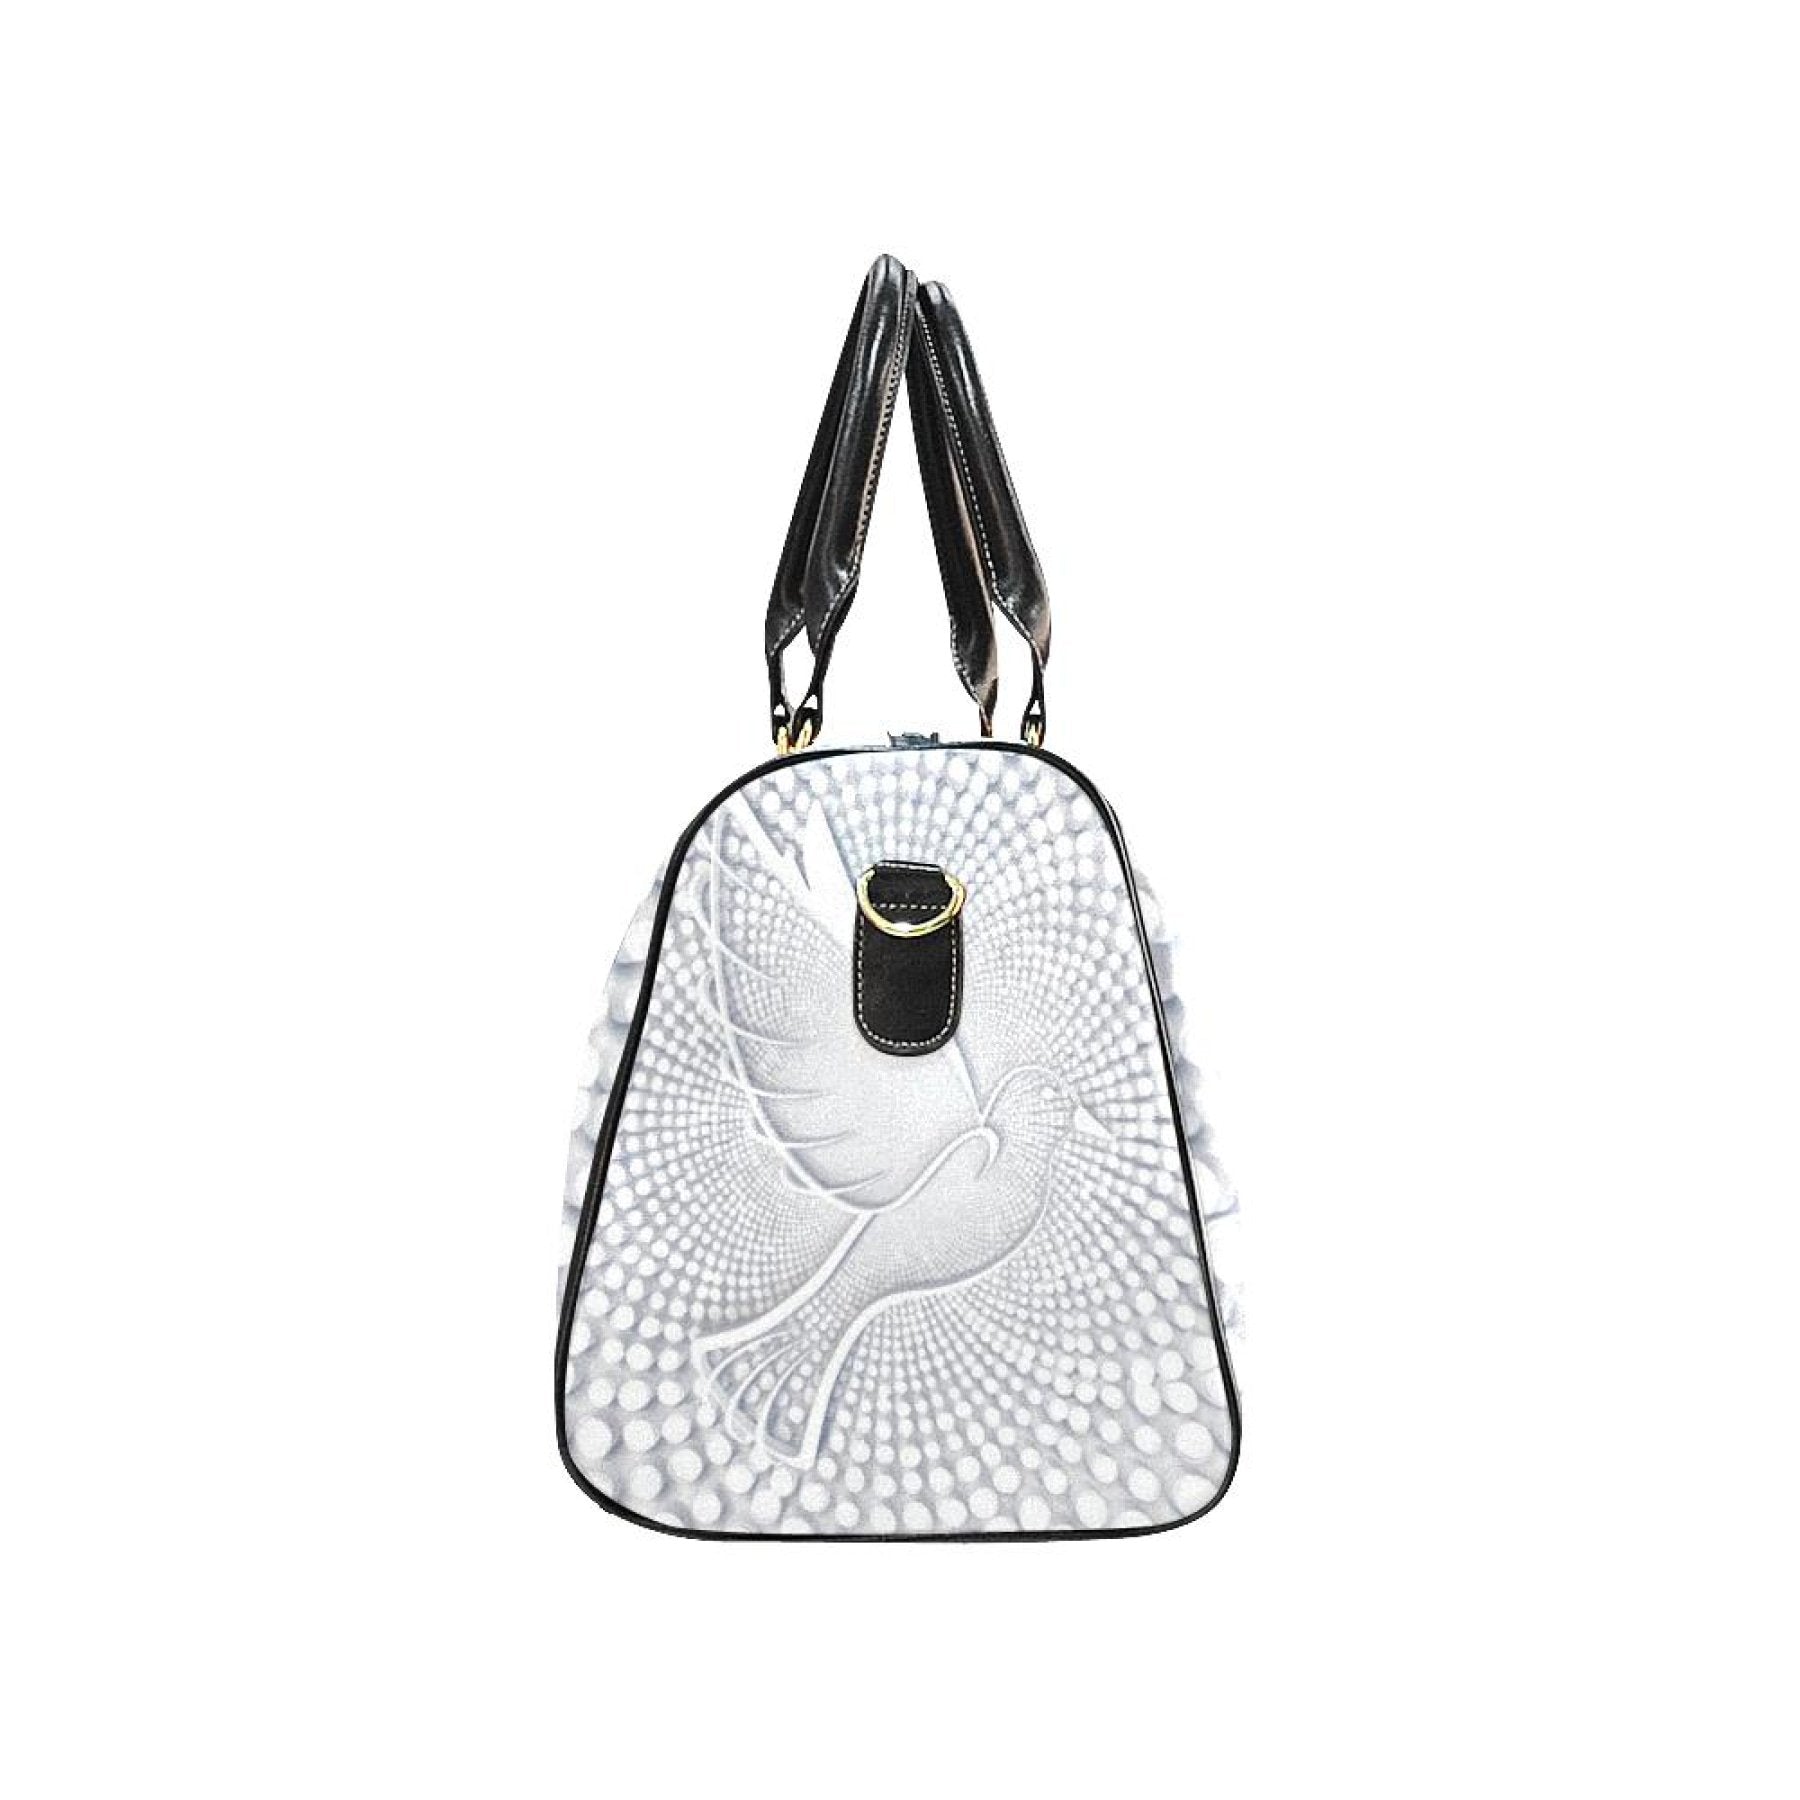 Travel Bag, Leather Carry On Large Luggage Bag, White Dove